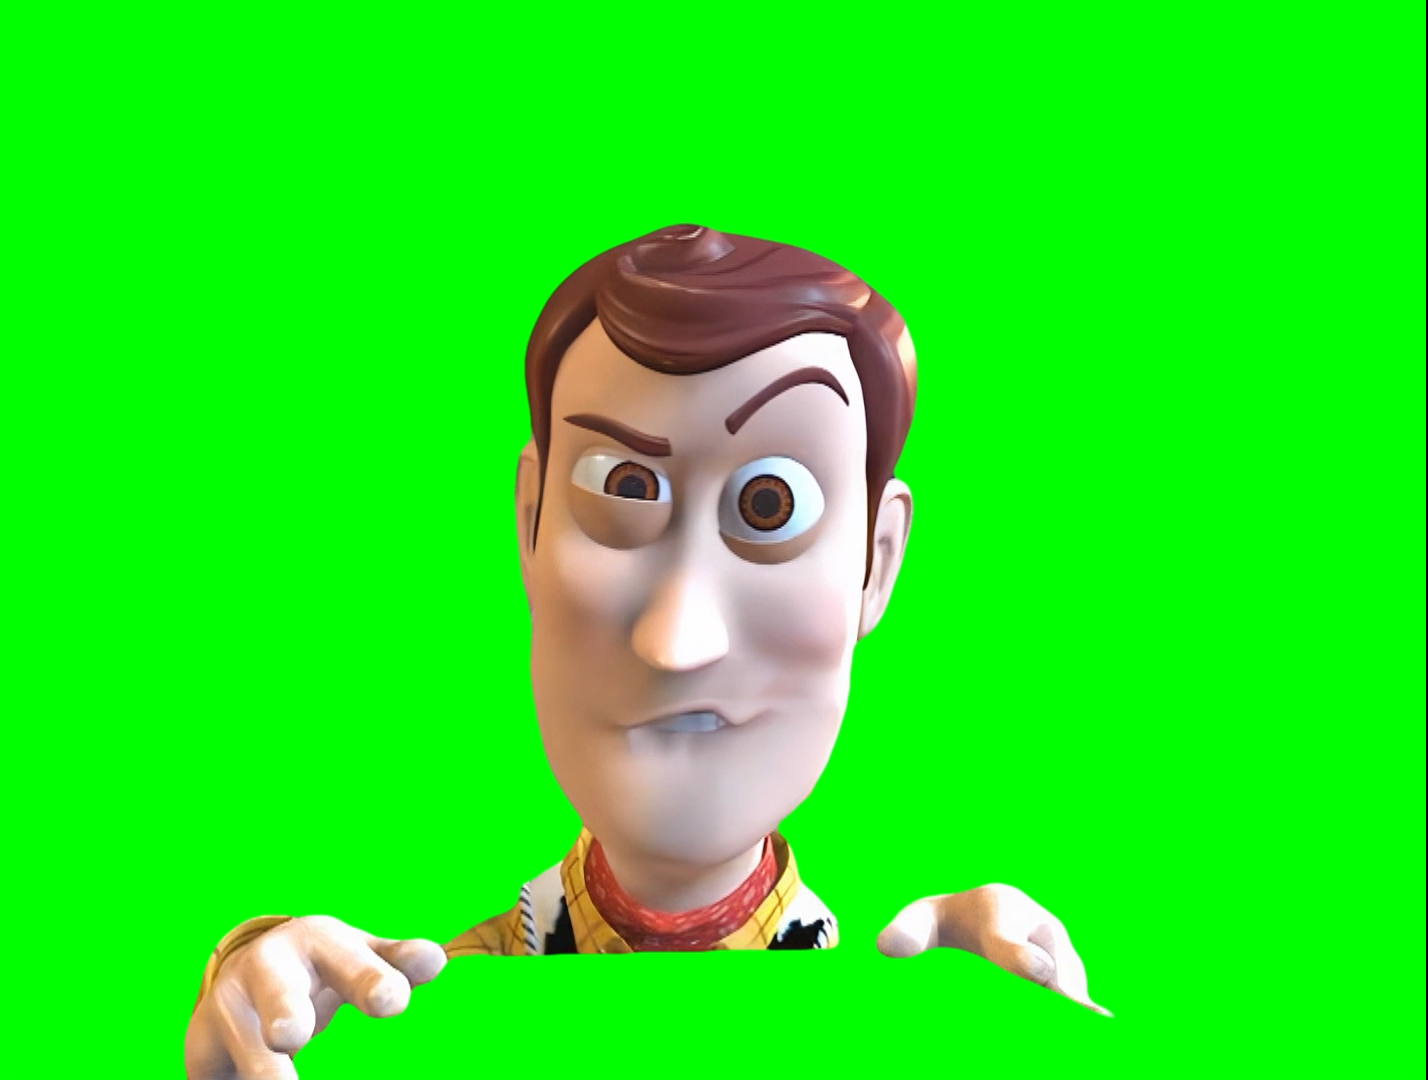 Woody Getting Mad Toy Story meme (Green Screen)